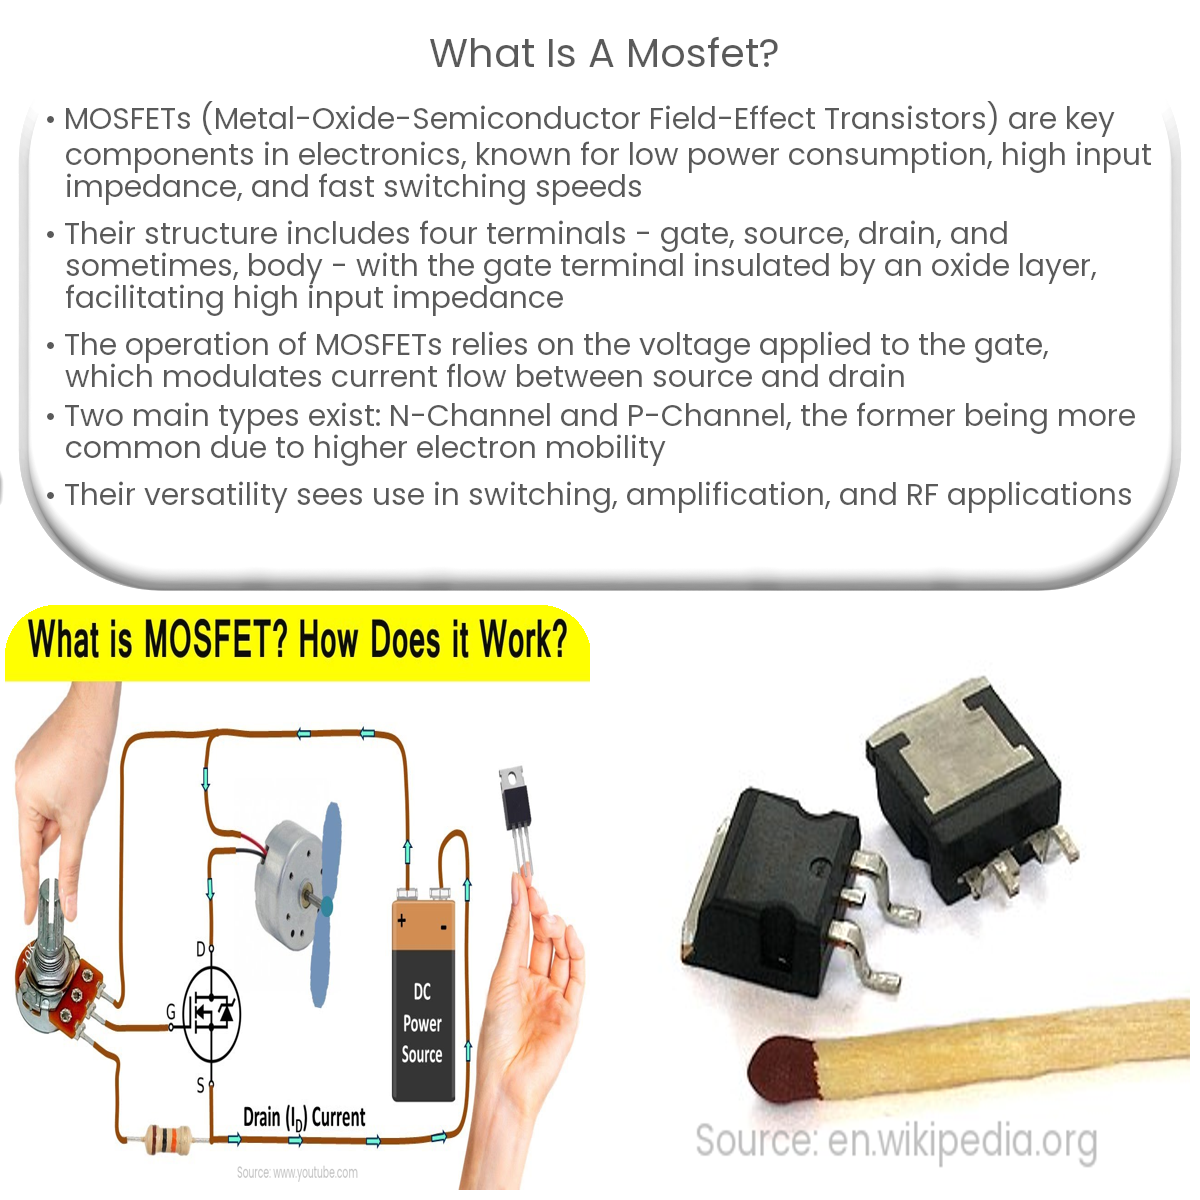 What is a MOSFET?